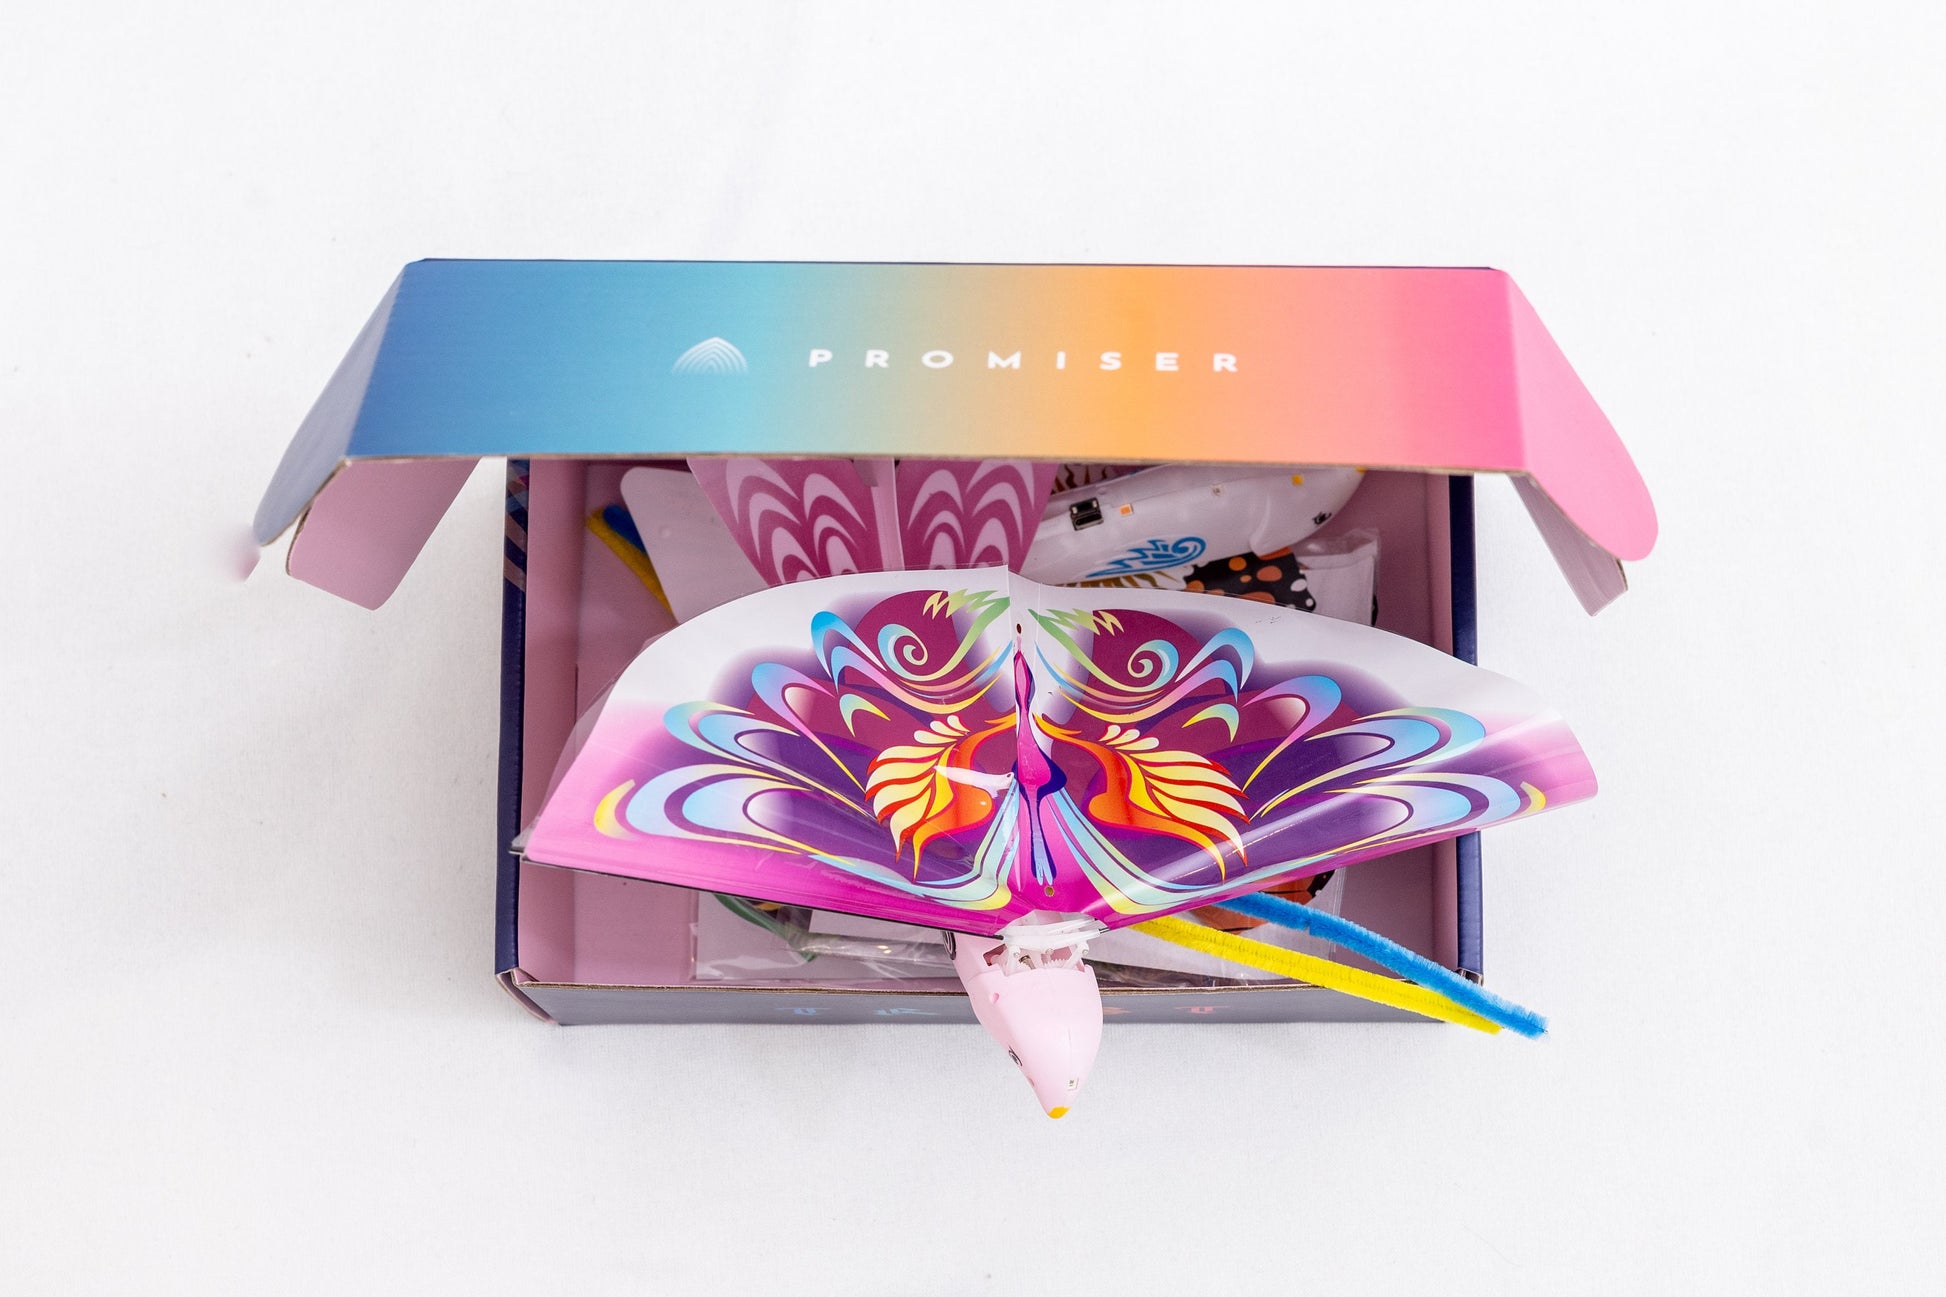 Butterfly PromiseBox | Christian STEM Activity Box for Kids | Science Box | Engineering Box | Church Activity | Faith-based Learning | STEAM